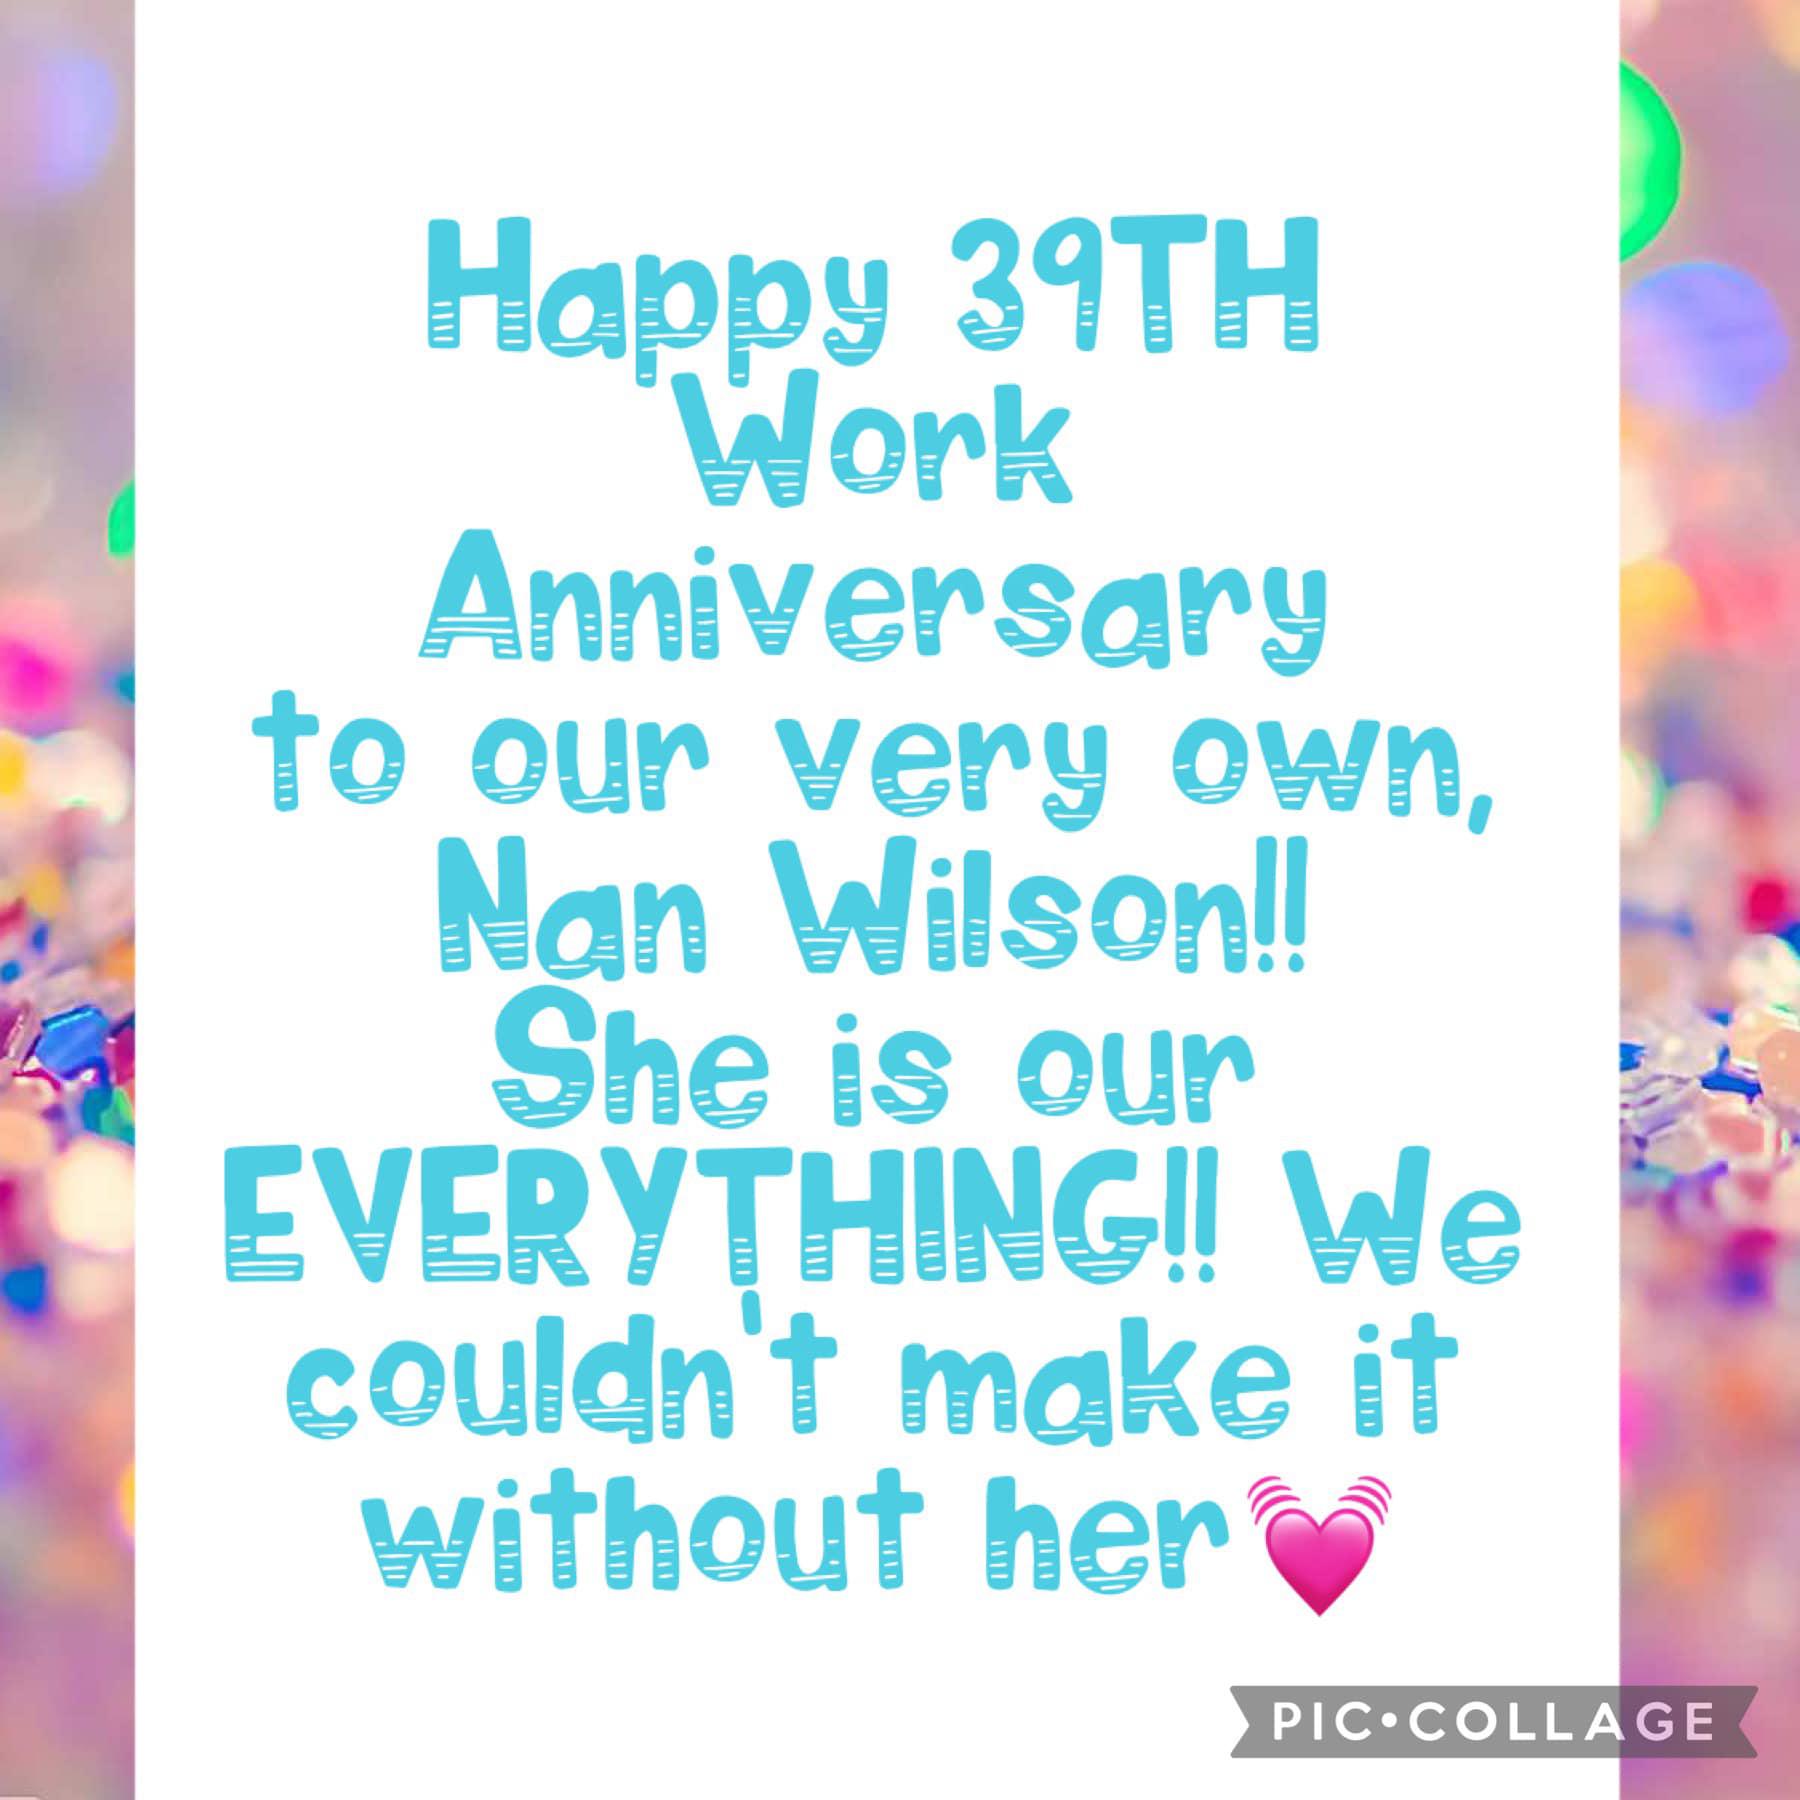 If you know her, YOU KNOW SHE IS OUR EVERYTHING!! So blessed to have Nan Thompson Wilson on our team, her wisdom, leadership and experience are our office goals to strive for! “Think like Nan”, “What would Nan do?” A career of knowledge and wisdom and we are so Thankful SHE IS OURS❣️ 39 years today!!! Congrats🎉💓